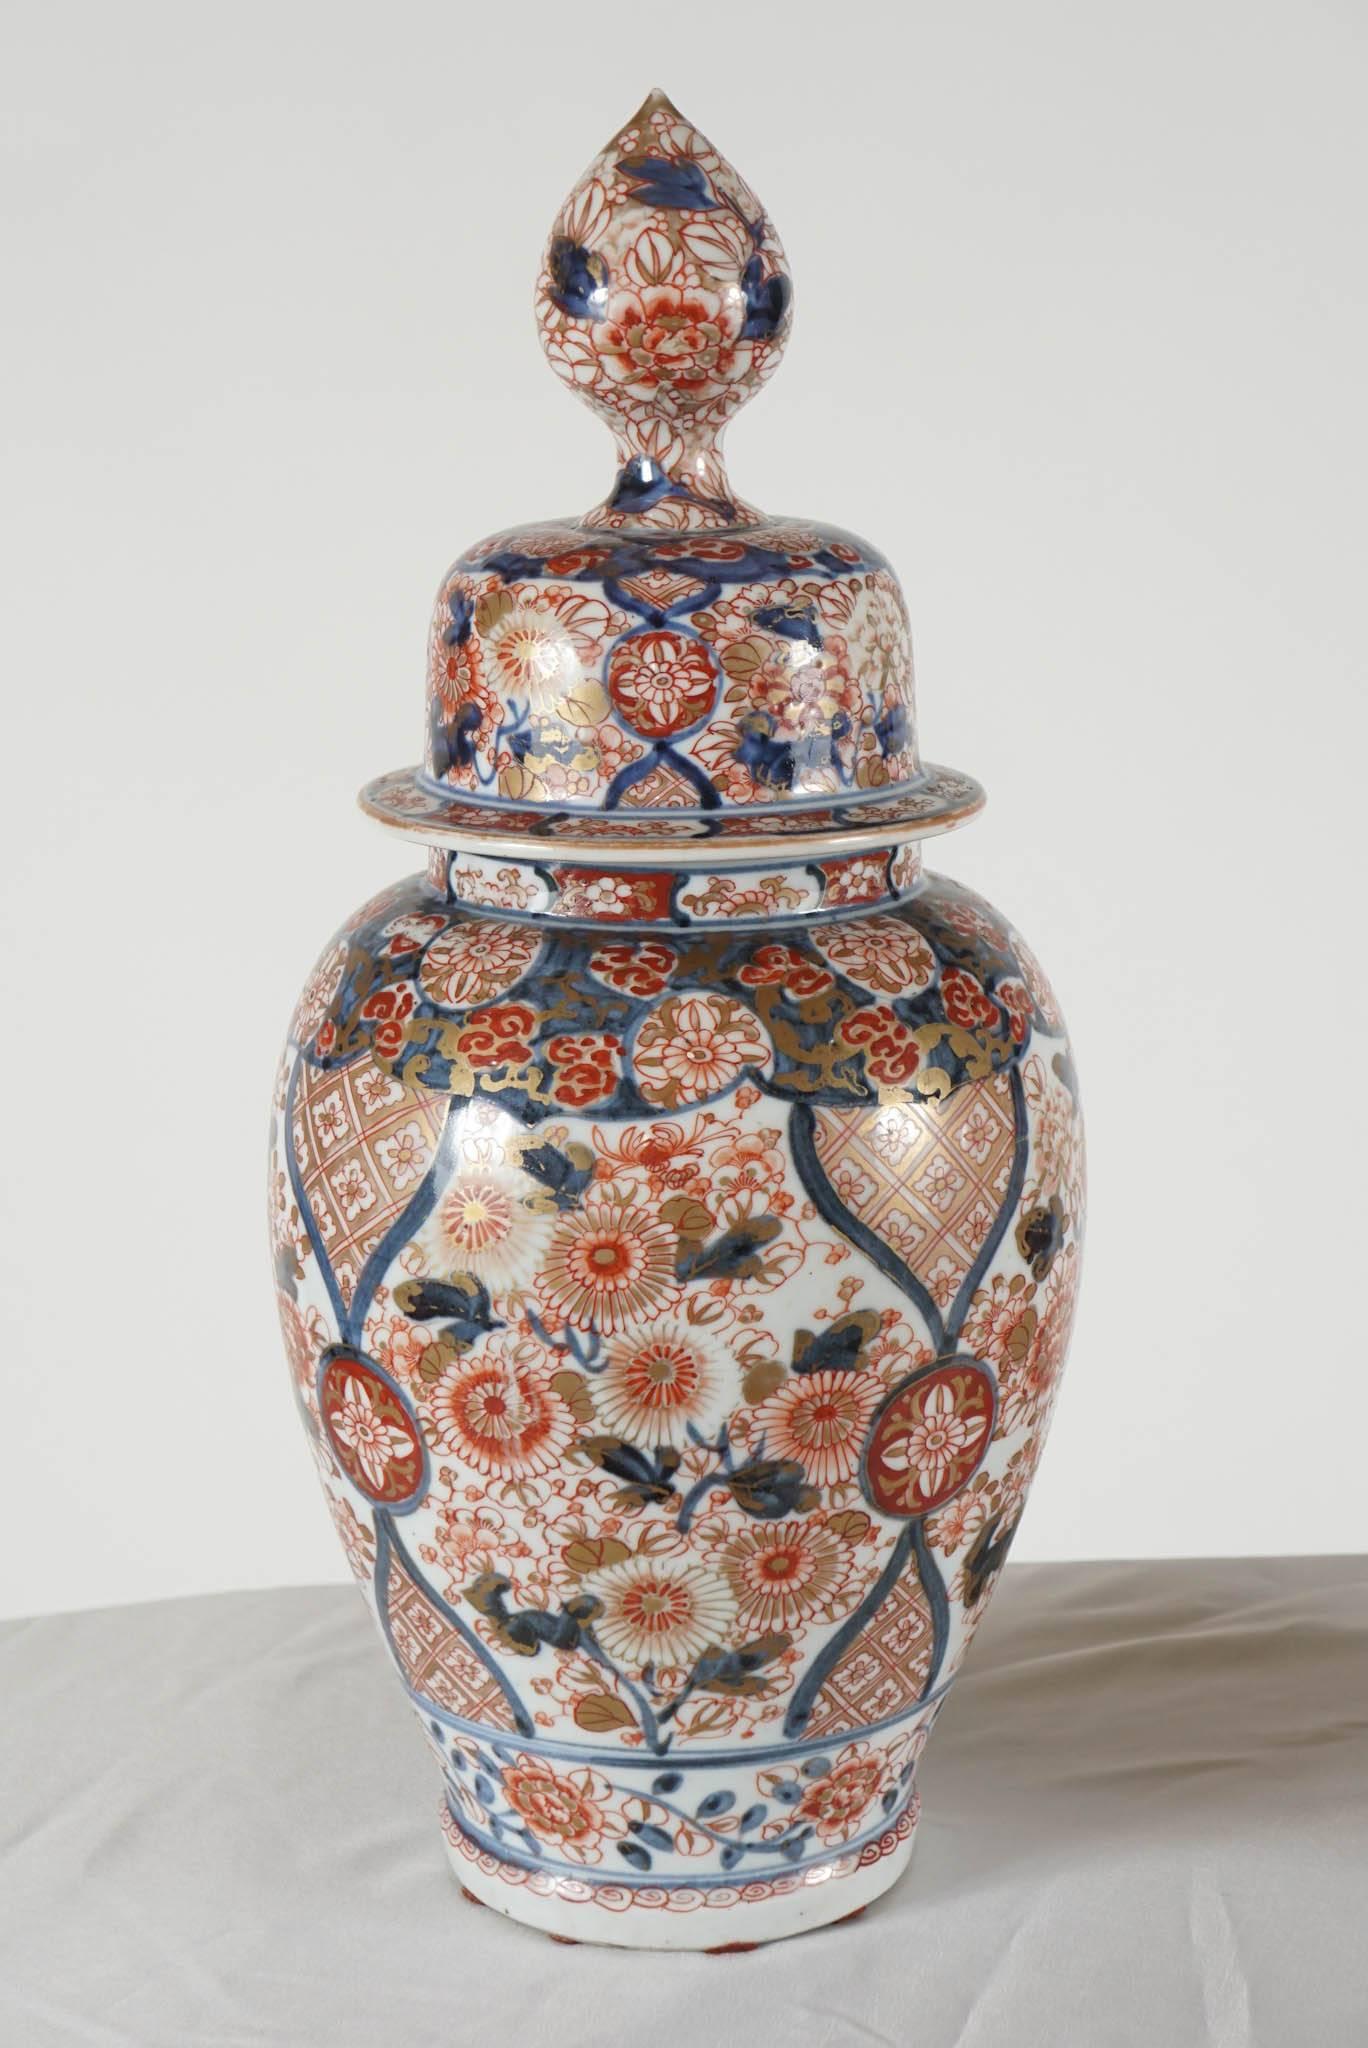 A beautiful pair of circa 1880 Japanese Imari porcelain covered jars in Edo style having globular bodies with foliate patterns painted in underglaze cobalt blue and overglaze iron red with allover gilded highlights. The high domed covers have